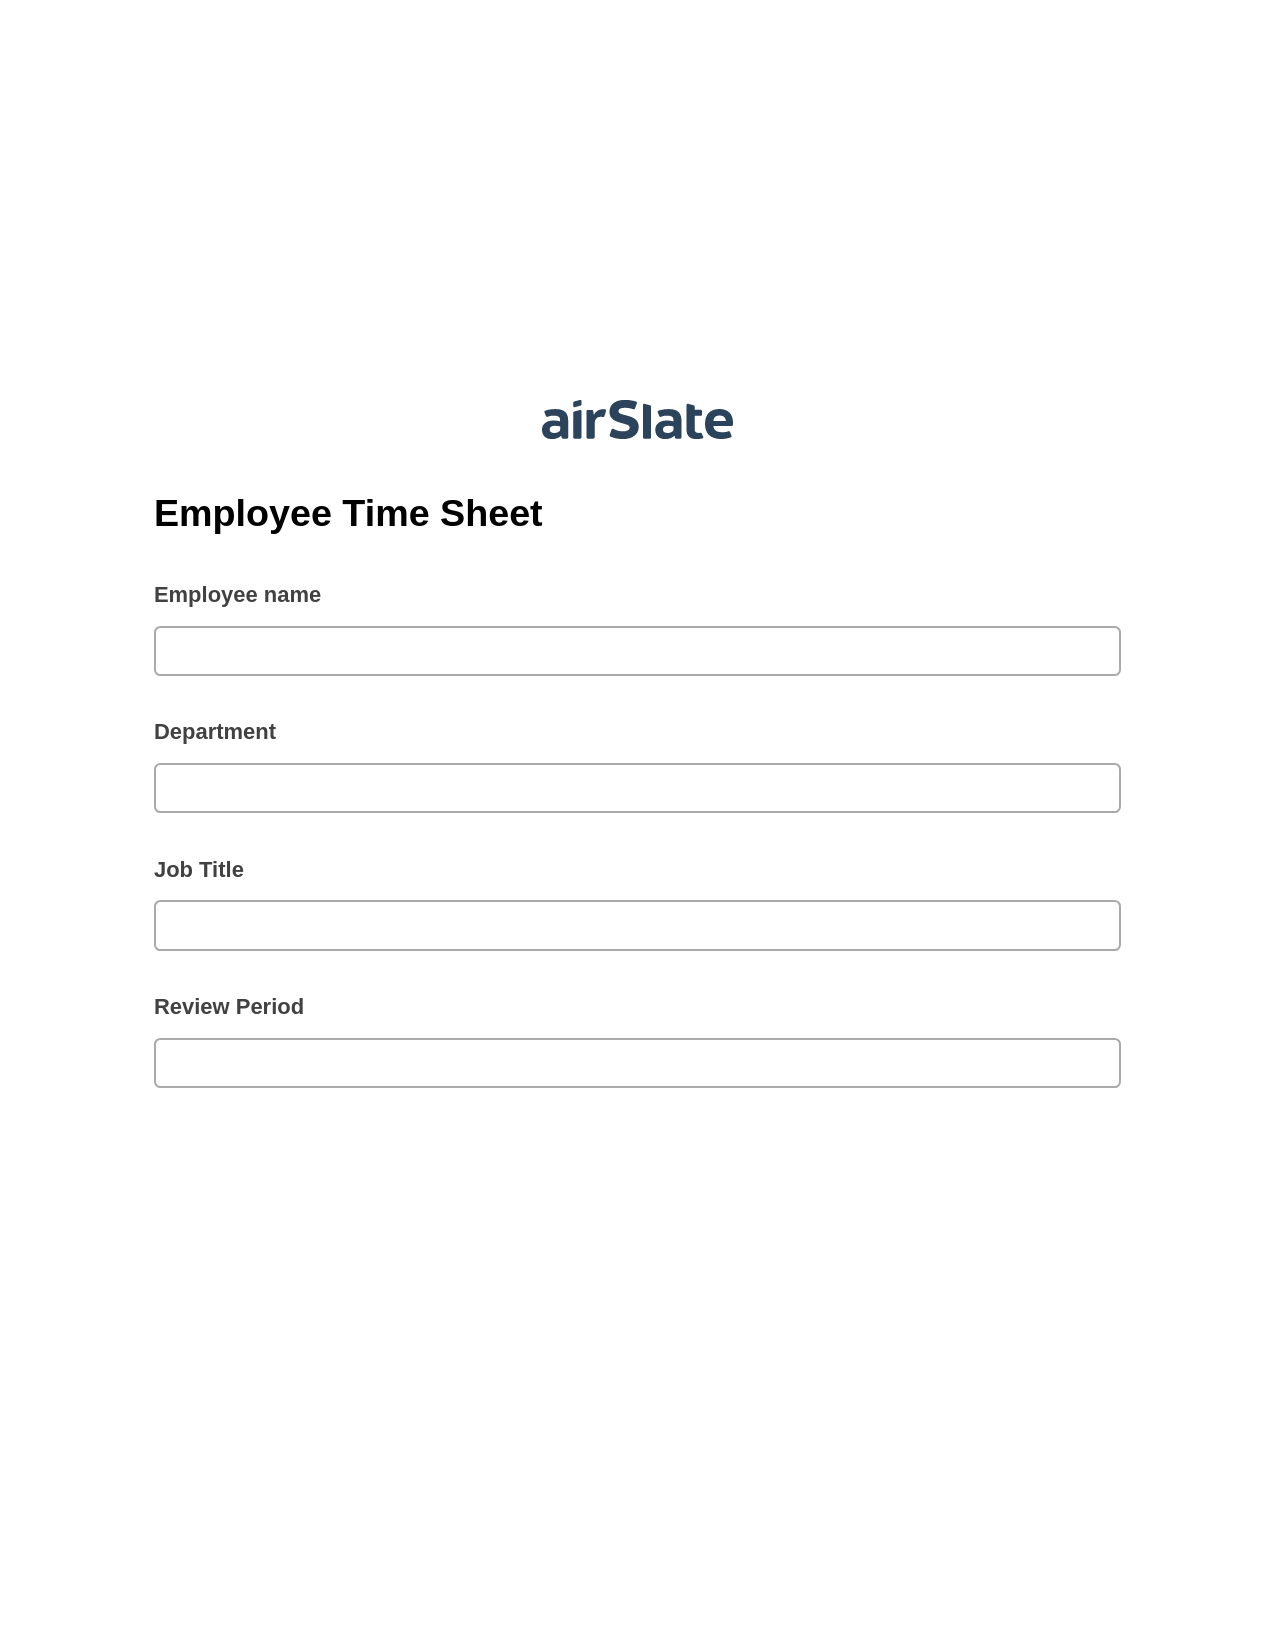 Employee Time Sheet Pre-fill Document Bot, Update Audit Trail Bot, Email Notification Postfinish Bot